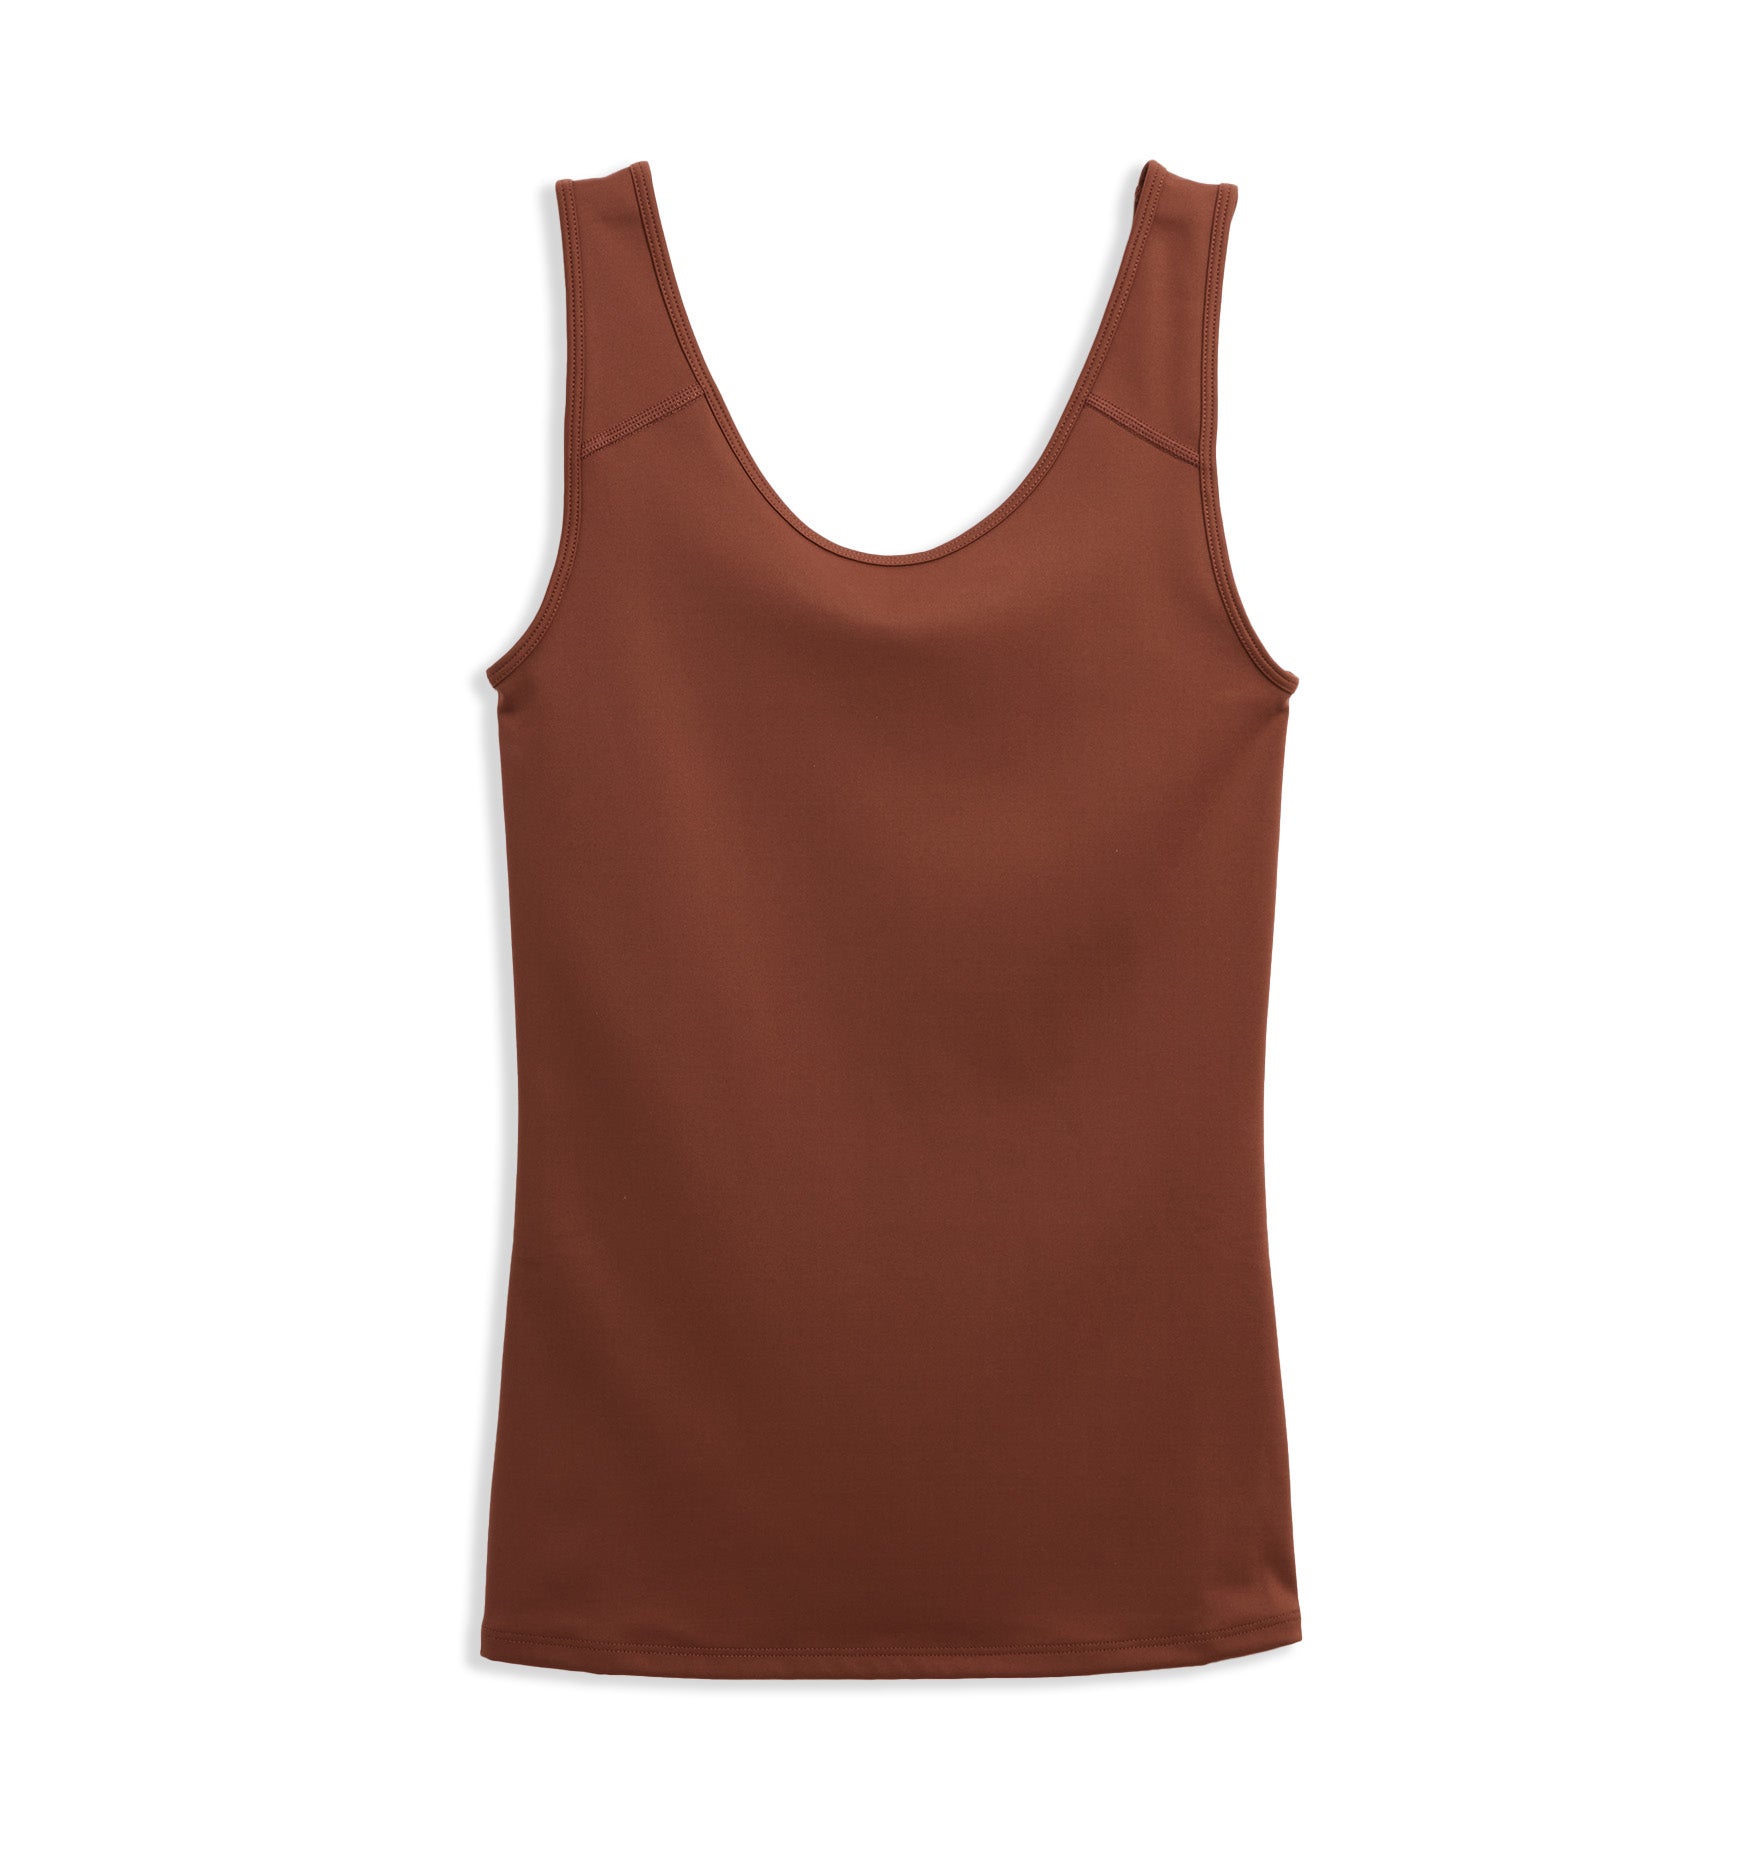 Tomboyx Compression Tank In Blue Stone